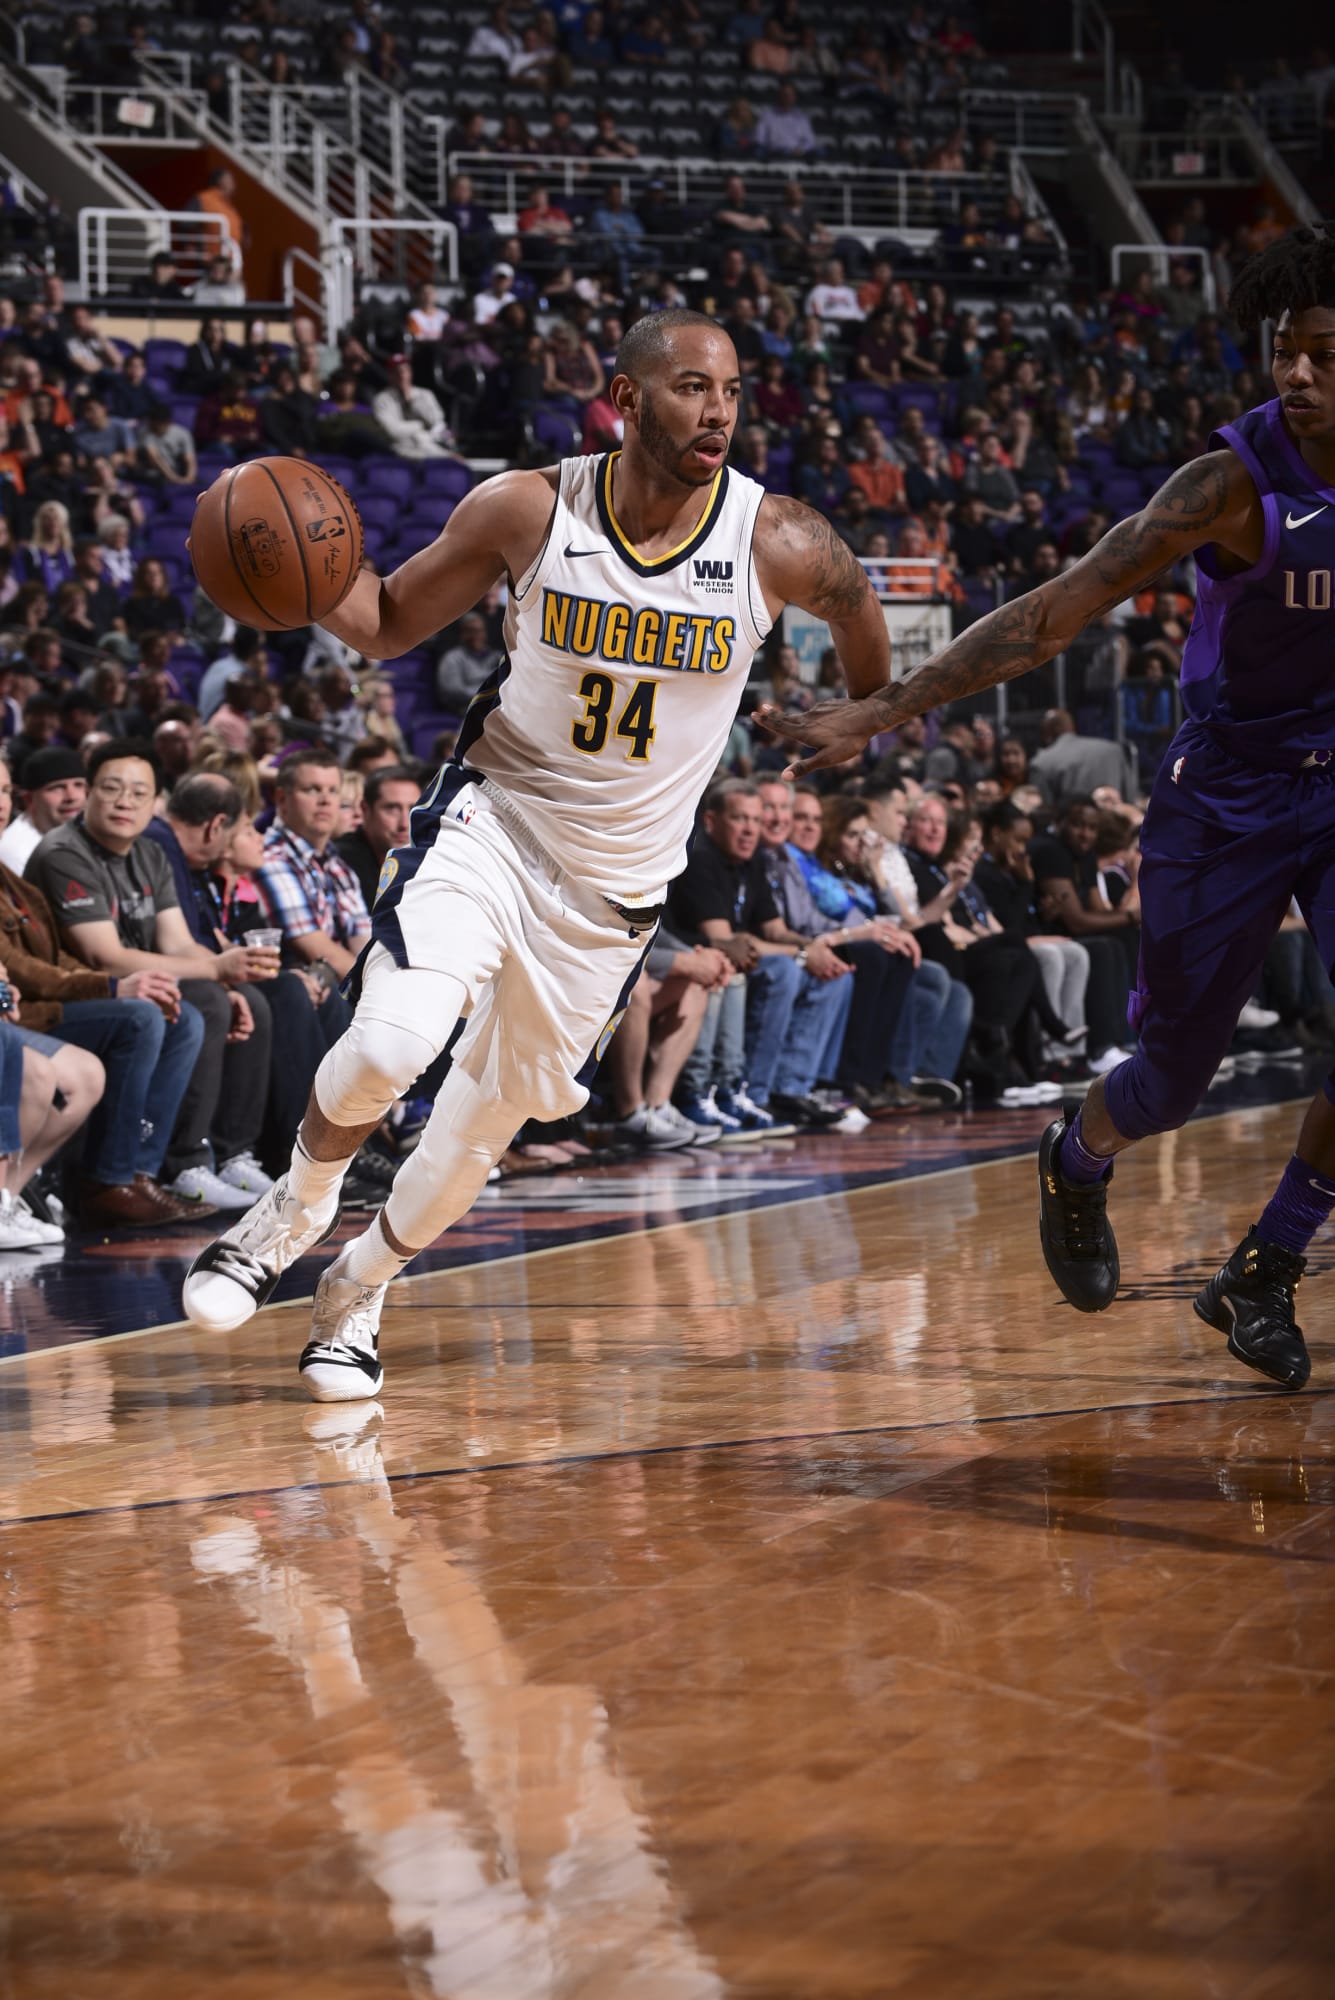 The Denver Nuggets had a solid win over the Phoenix Suns.